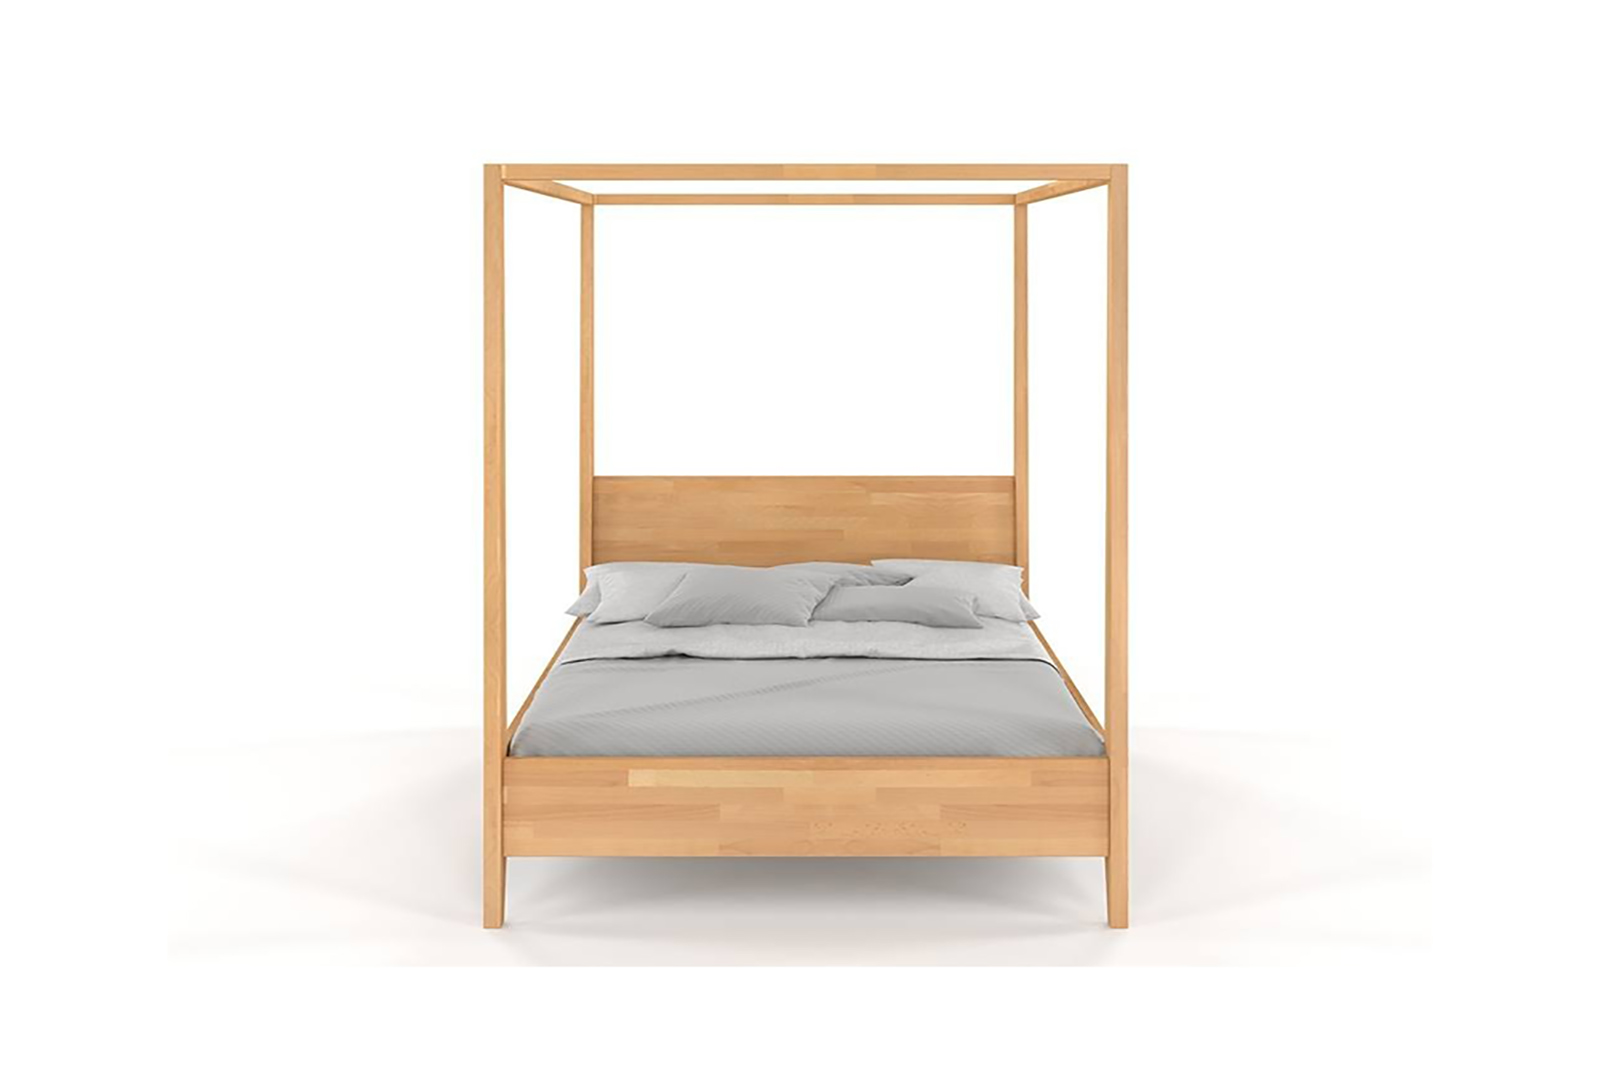 WOODEN BEECH BED WITH A VISBY CANOPY CANOPY